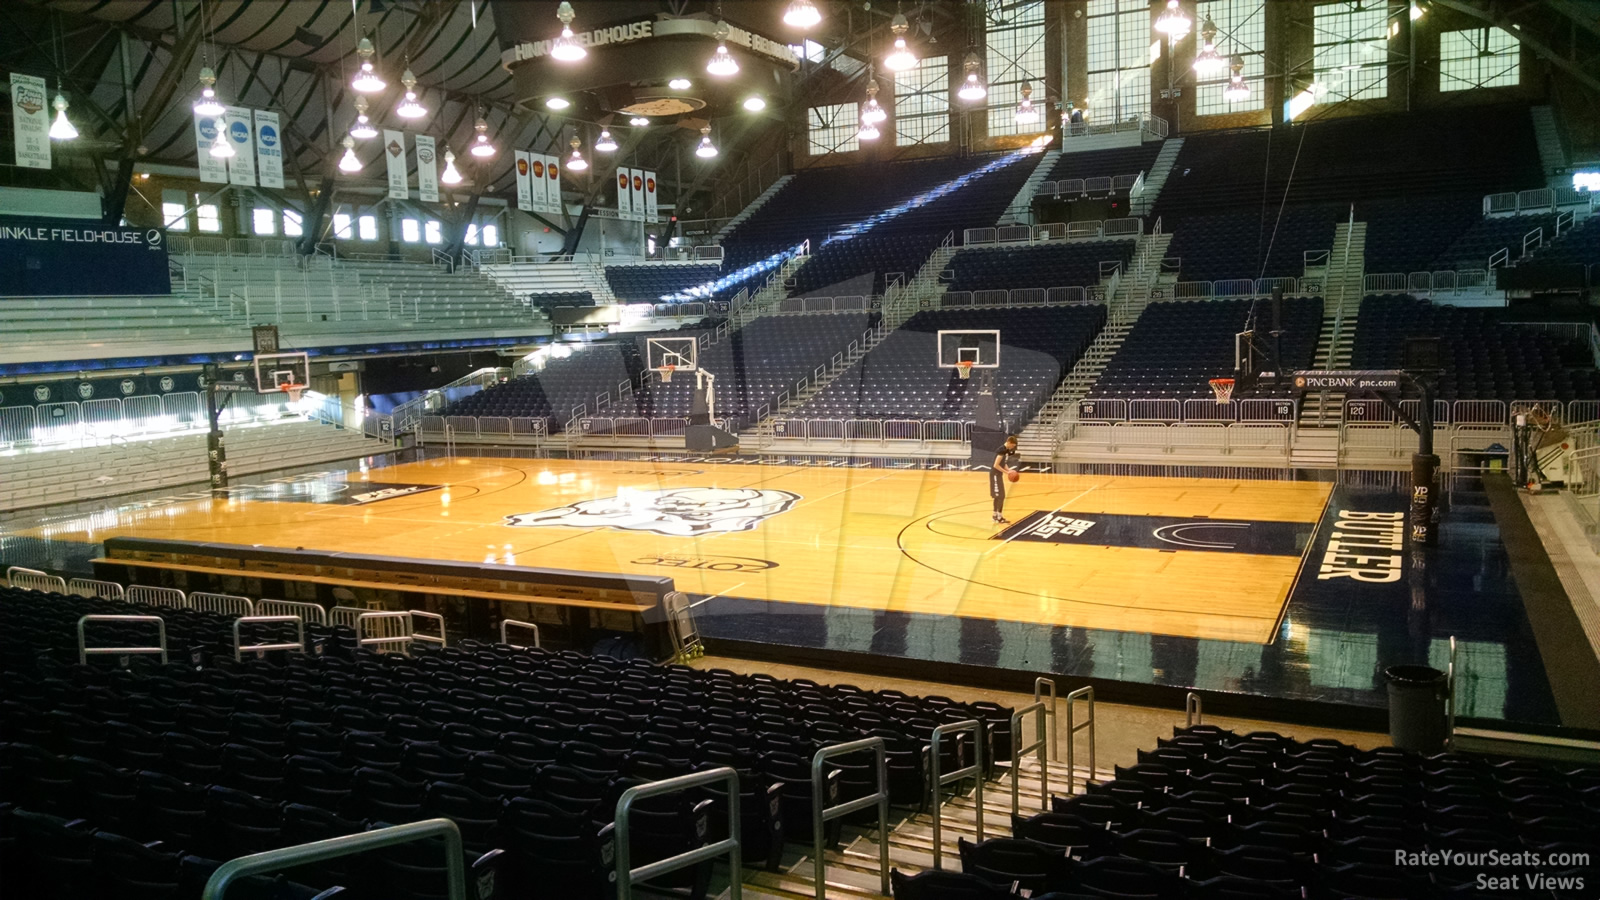 section 104, row 15 seat view  - hinkle fieldhouse